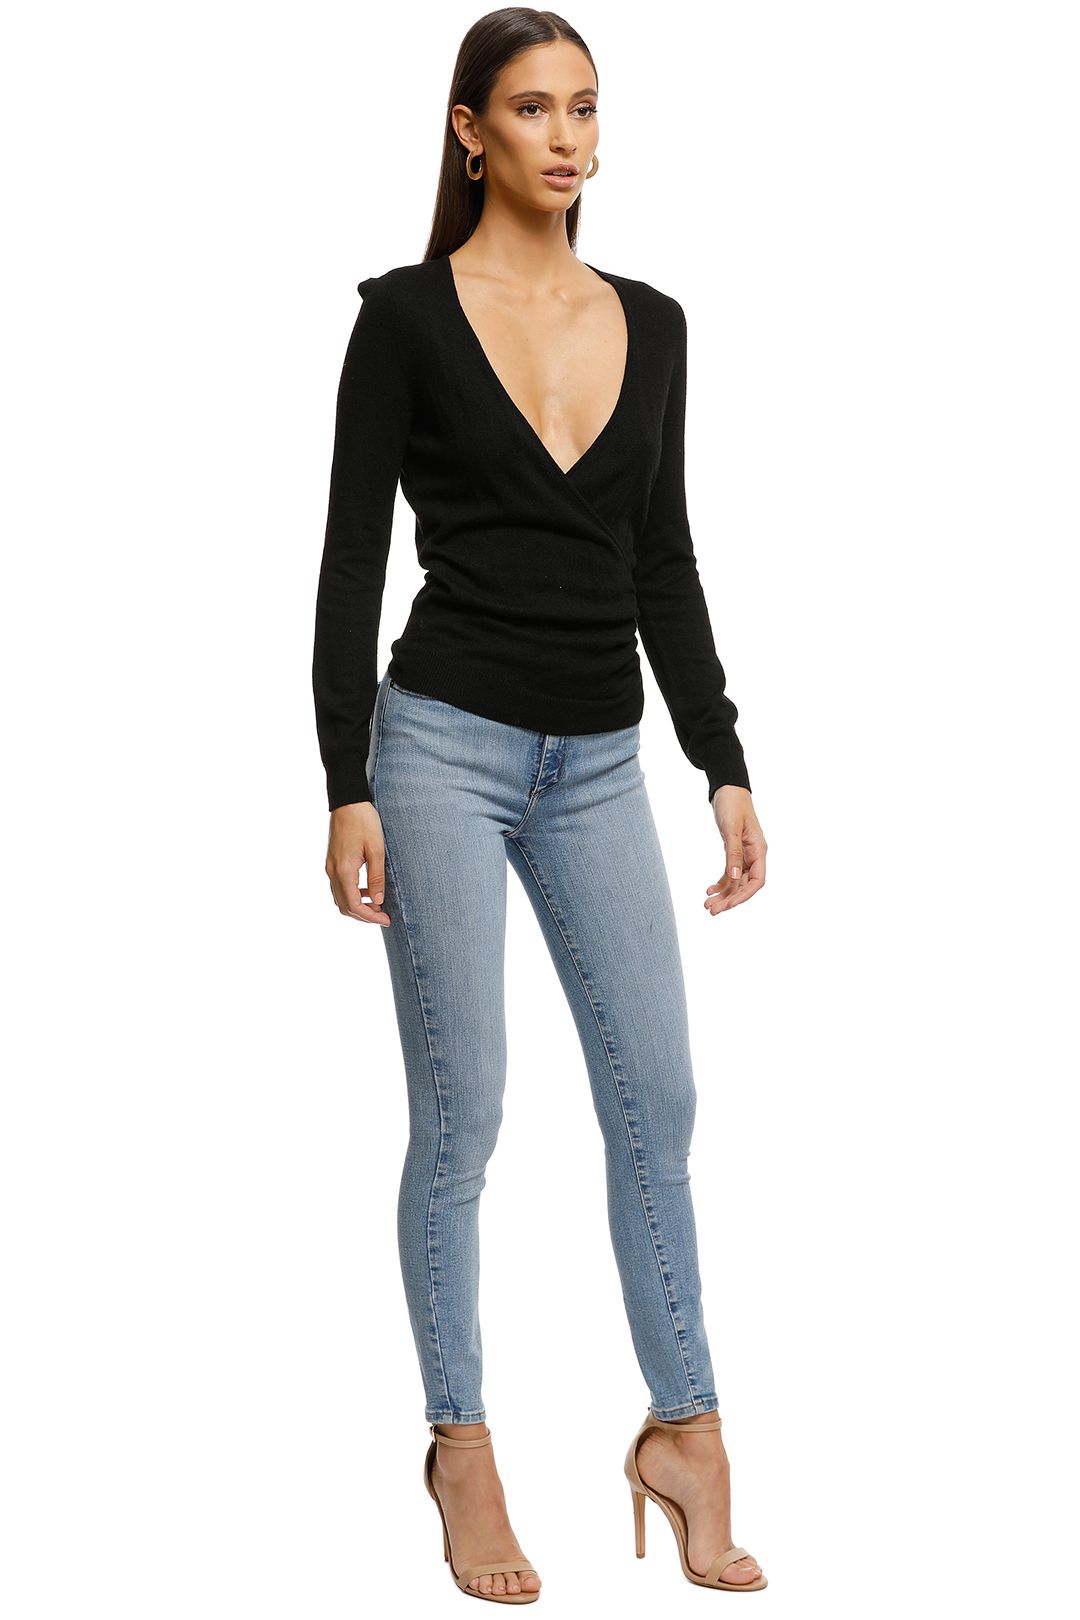 Rodeo Show - Stevie Knit - Black - Side